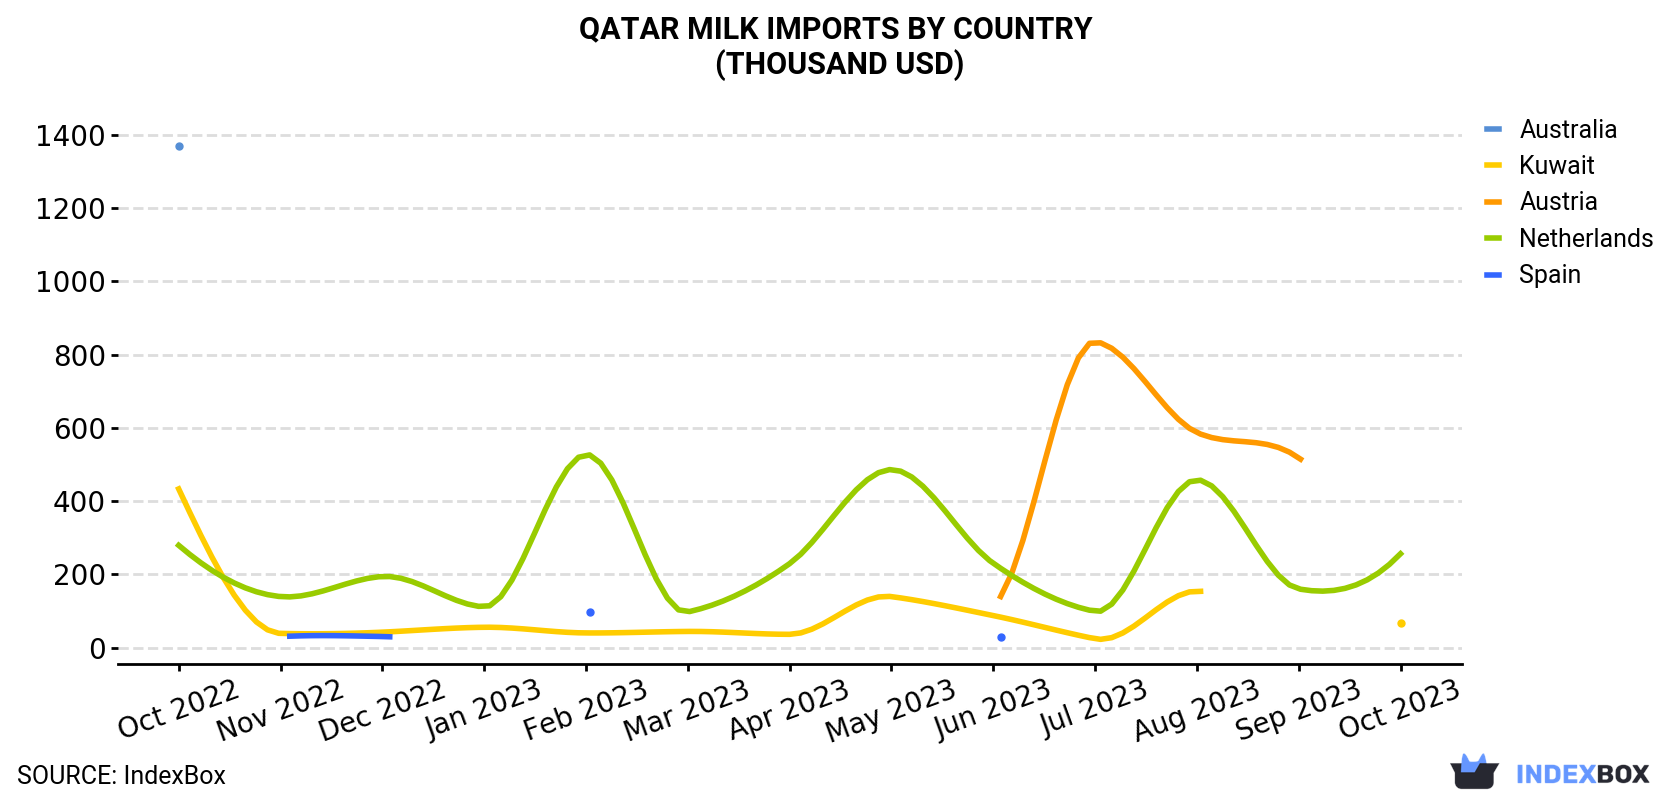 Qatar Milk Imports By Country (Thousand USD)